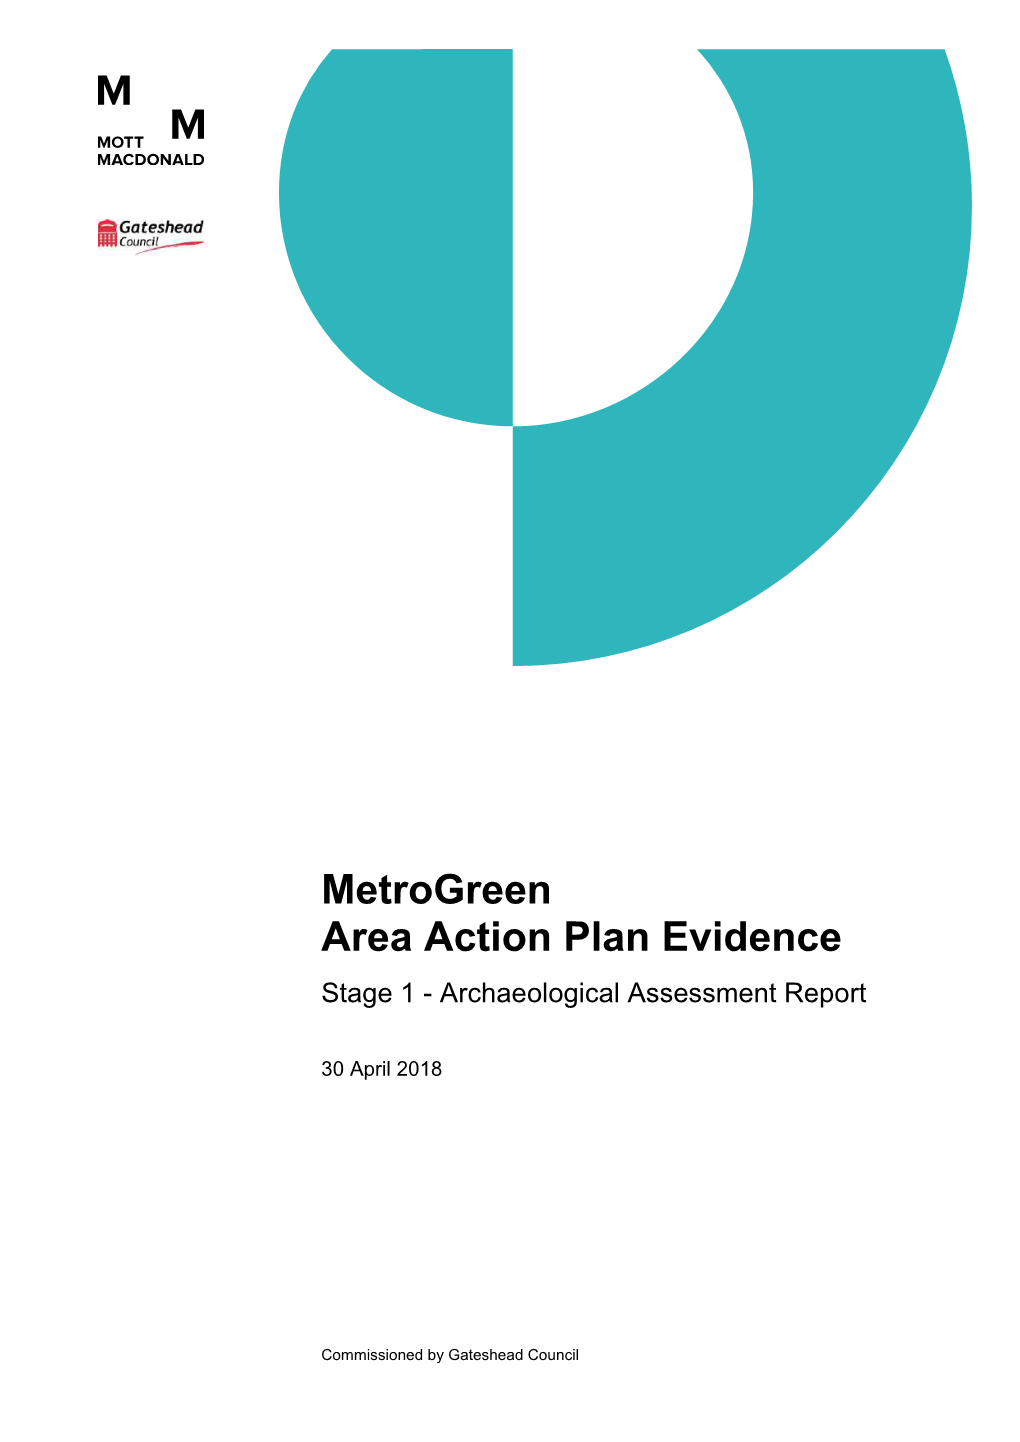 Metrogreen Area Action Plan Evidence Stage 1 - Archaeological Assessment Report